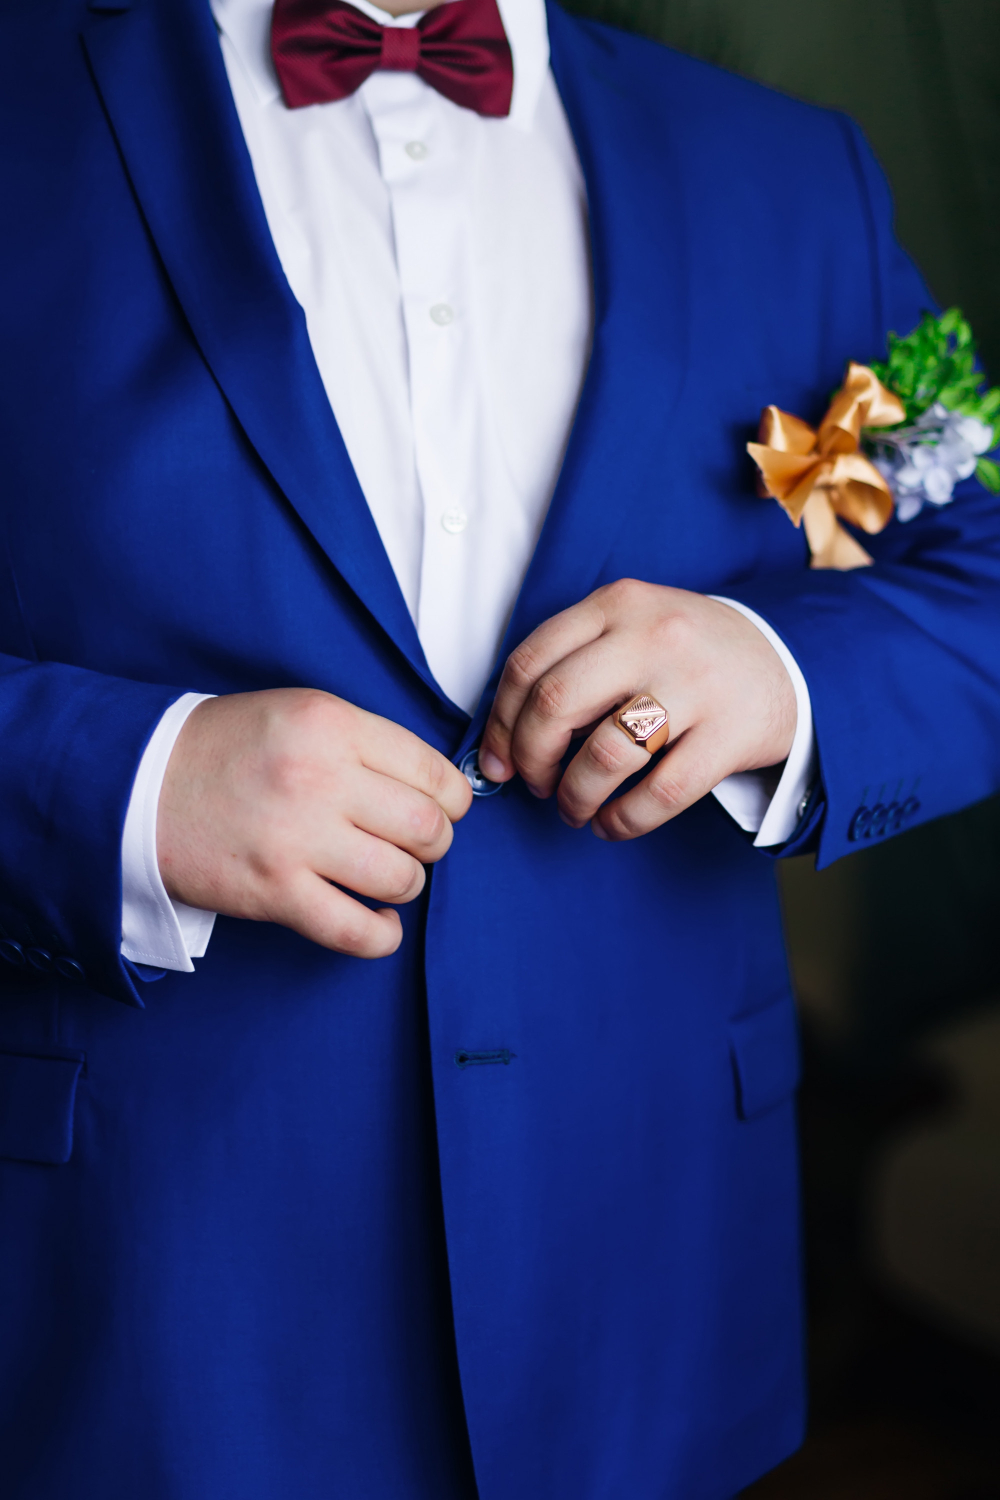 Photo groom in white shirt and stylish blue jacket with boutonniere.